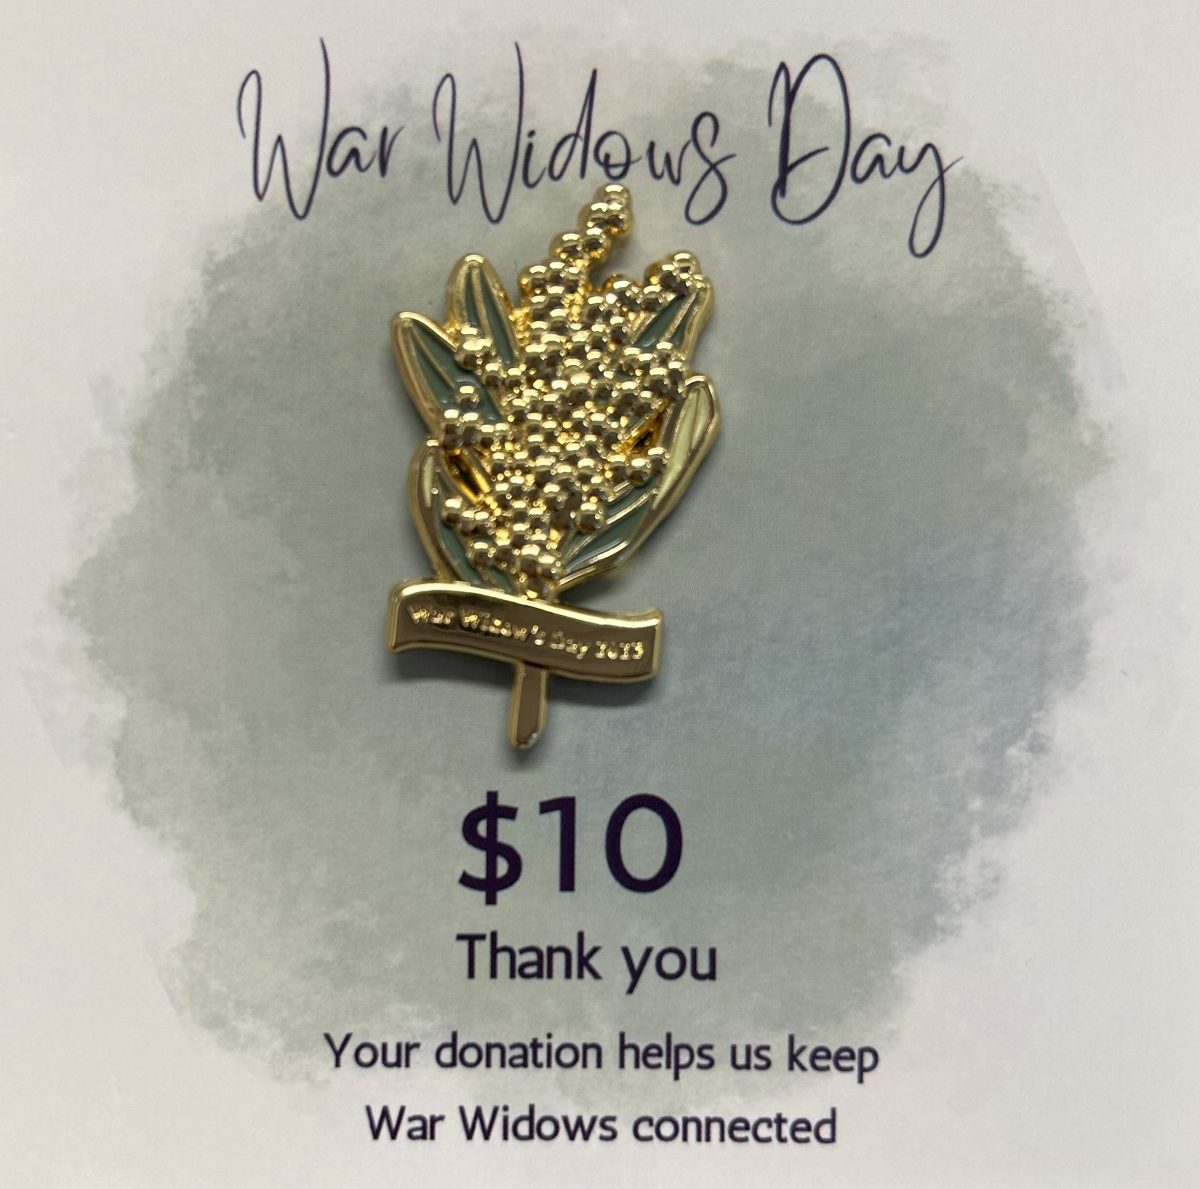 Buying a $10 lapel pin to wear on War Widows Day will help provide support and services